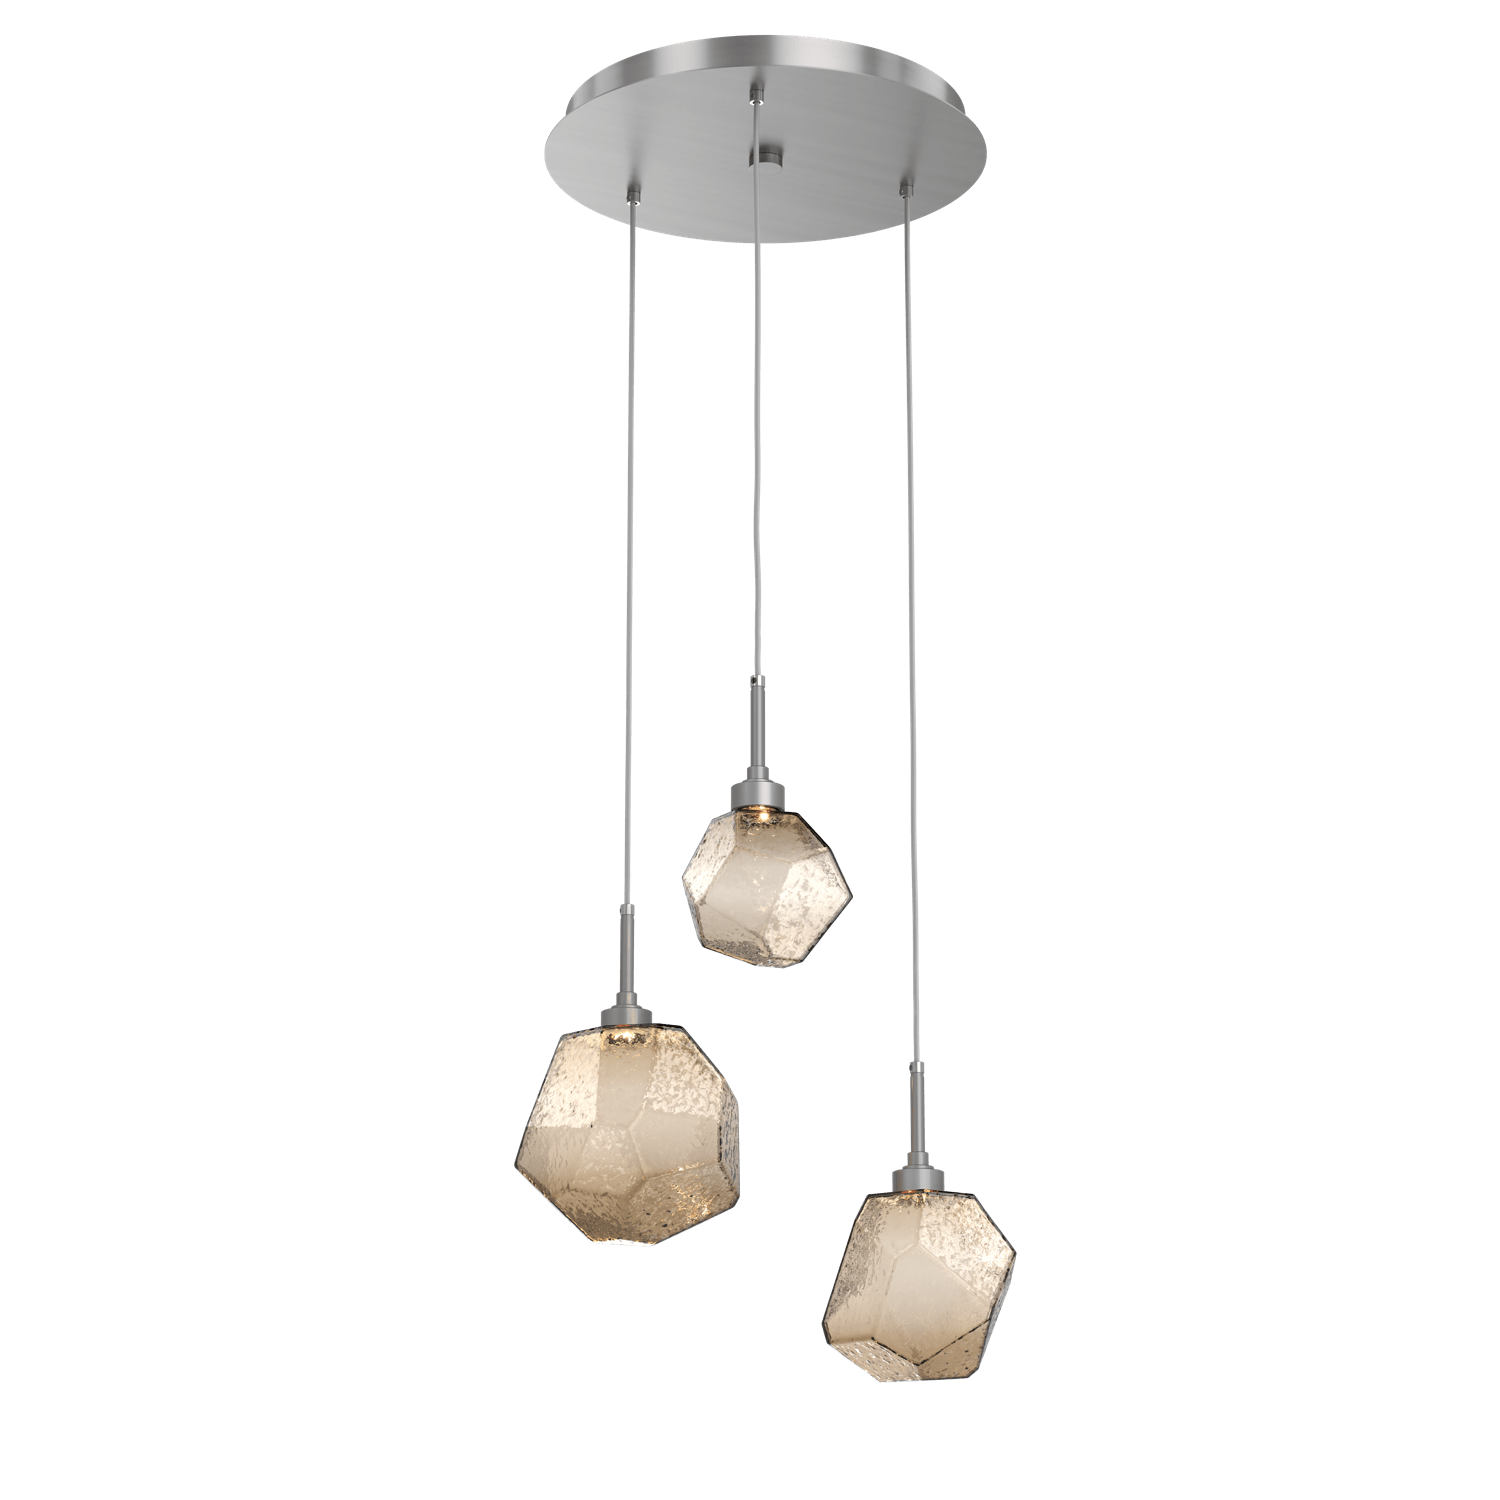 CHB0039-03-SN-B-Hammerton-Studio-Gem-3-light-round-pendant-chandelier-with-satin-nickel-finish-and-bronze-blown-glass-shades-and-LED-lamping